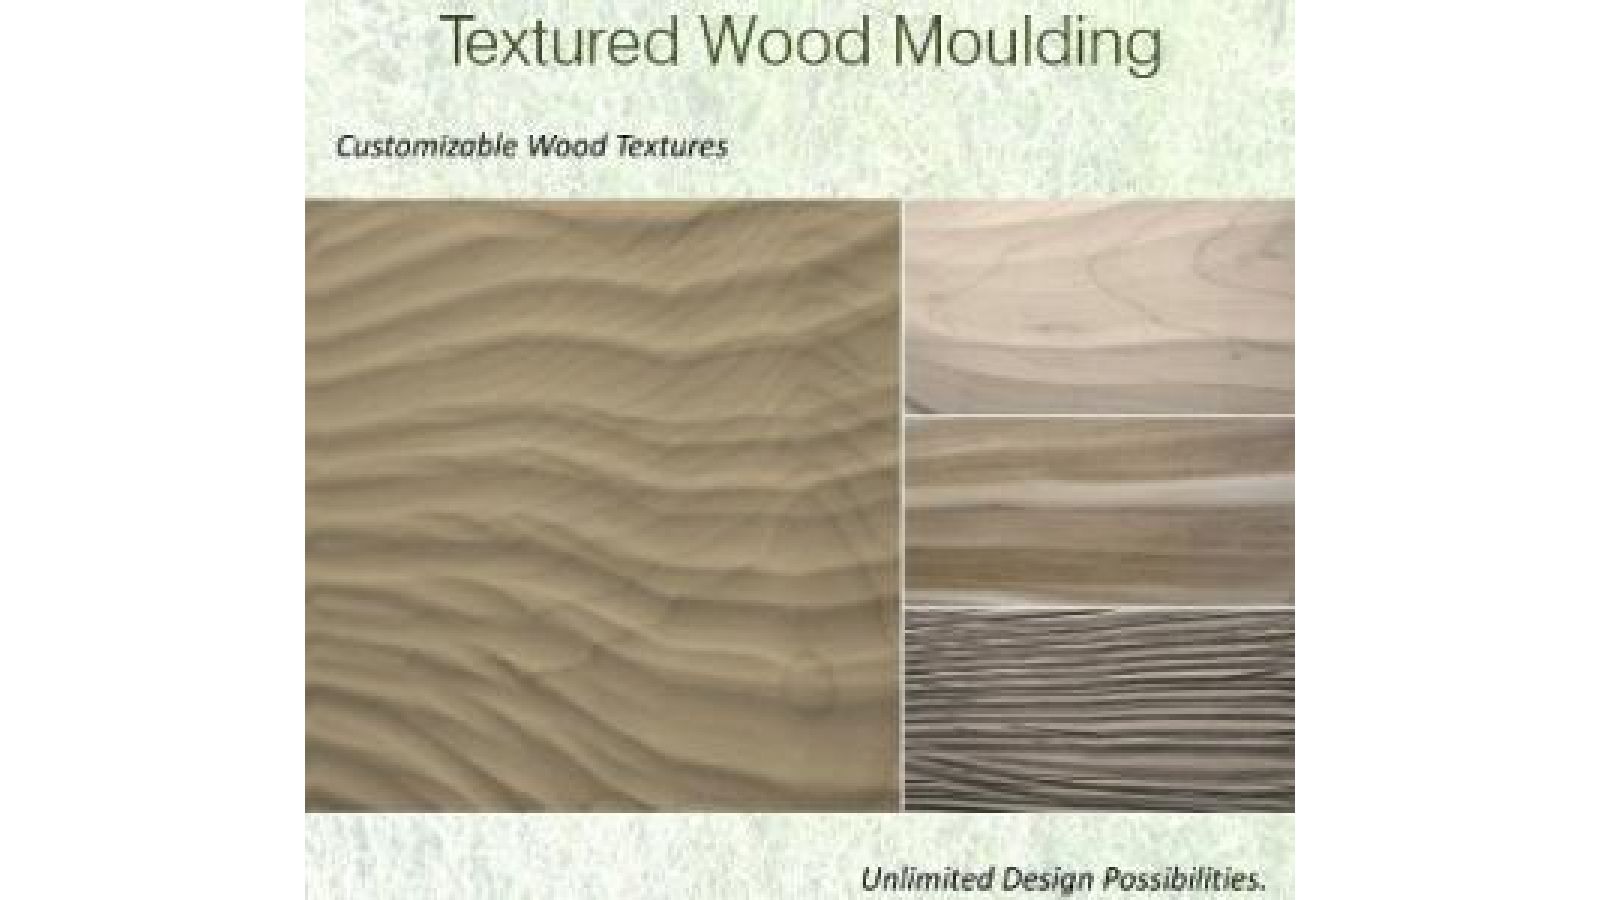 Textured Wood Moulding